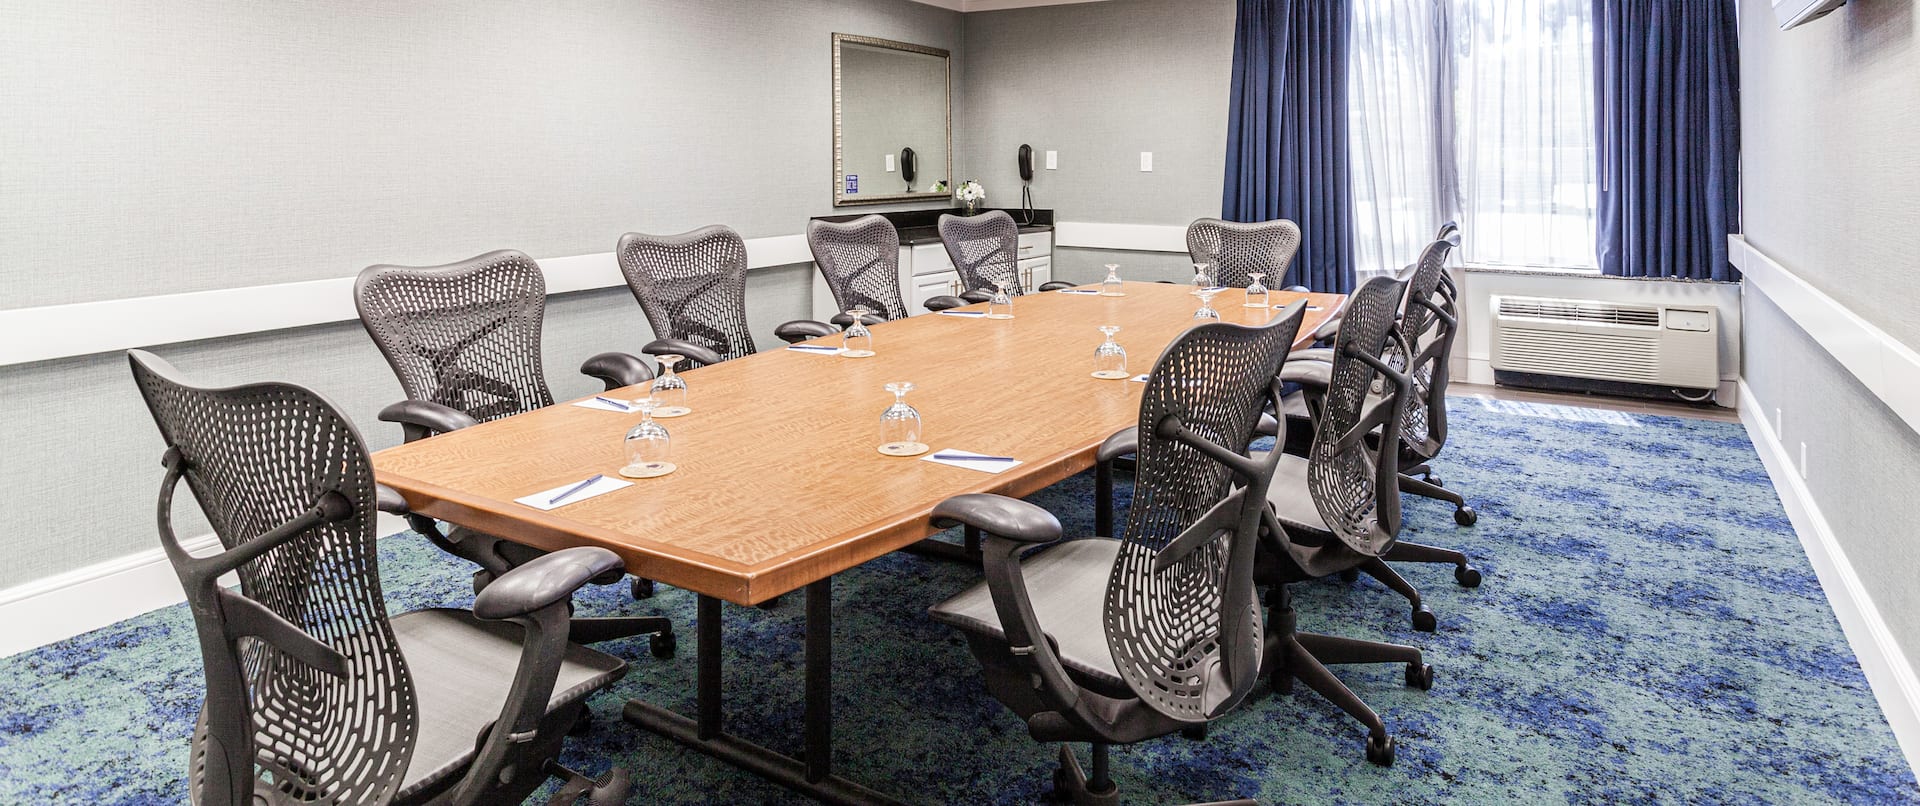 Meeting Room with table and chairs